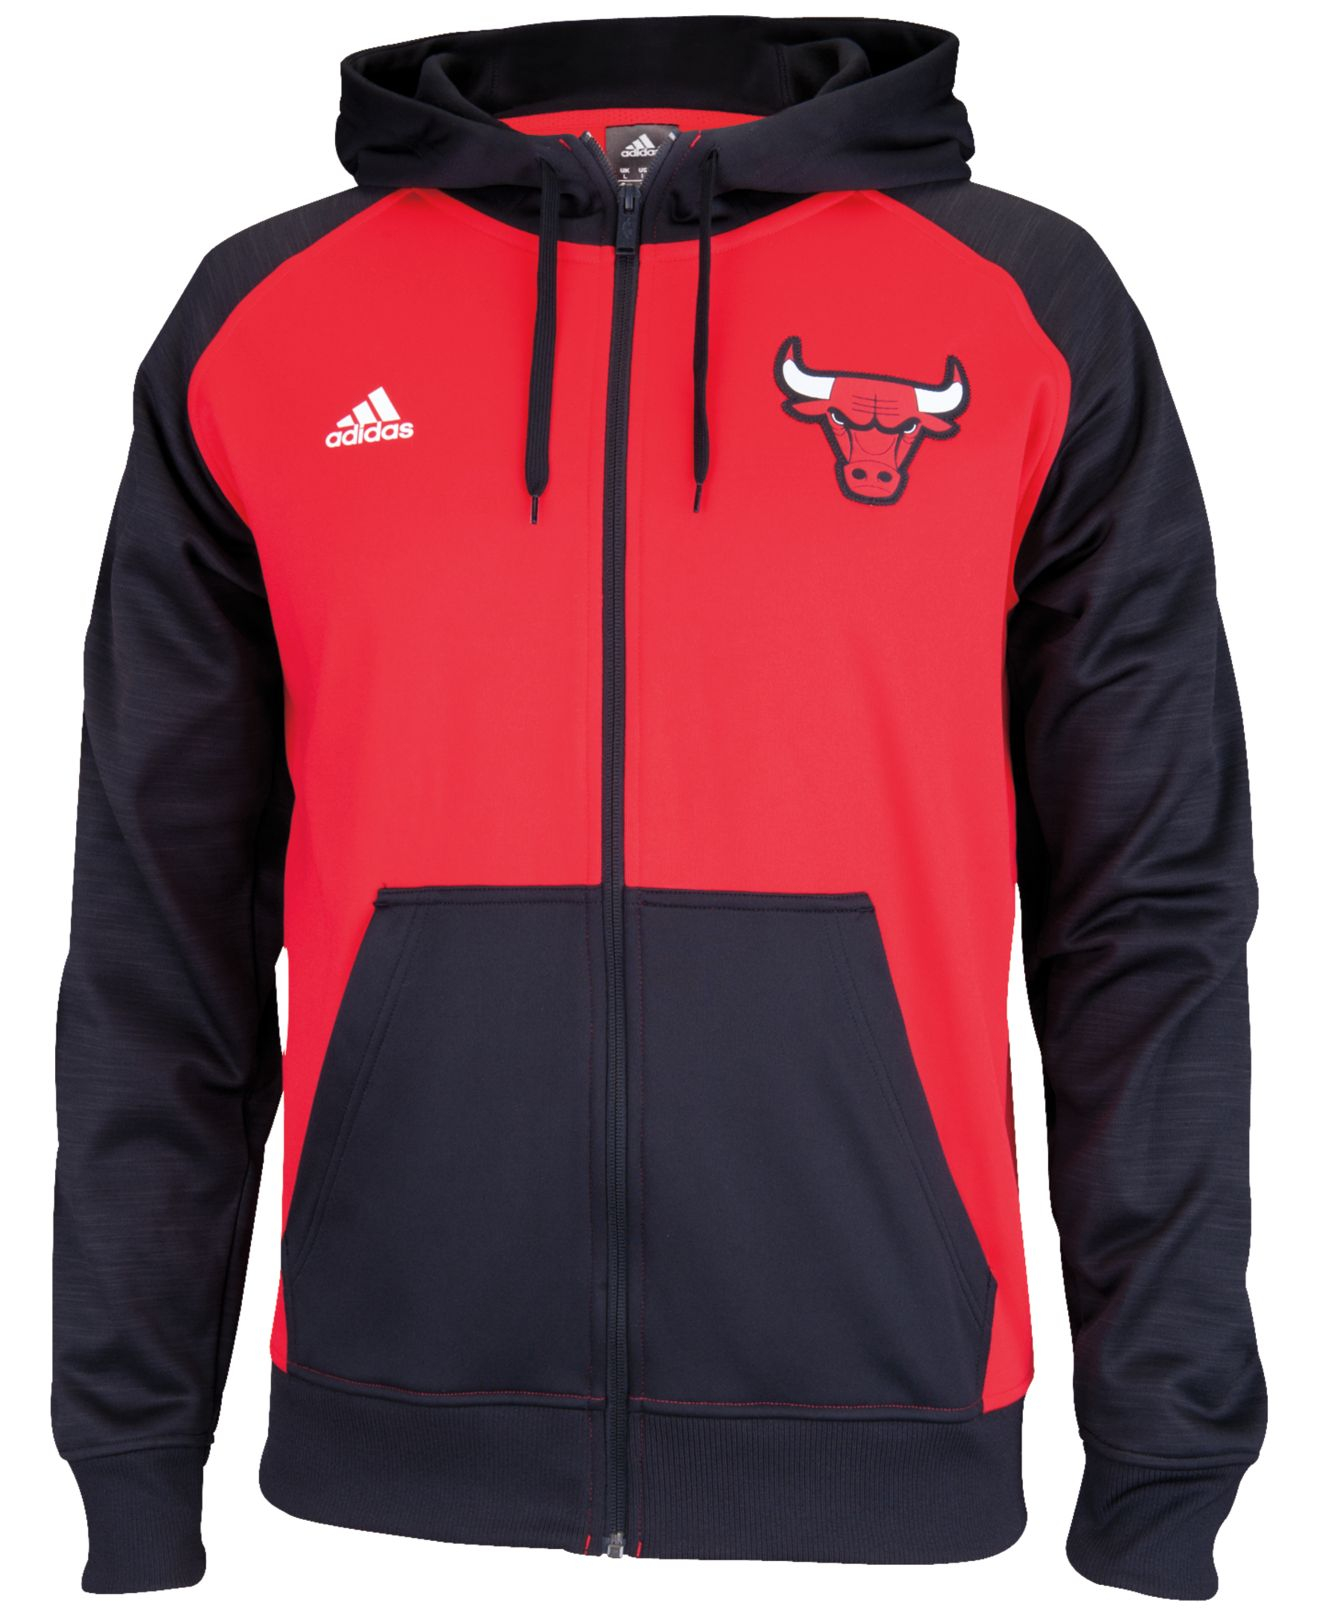 mens zip up adidas hoodie, big selling UP TO 74% OFF - research.sjp.ac.lk